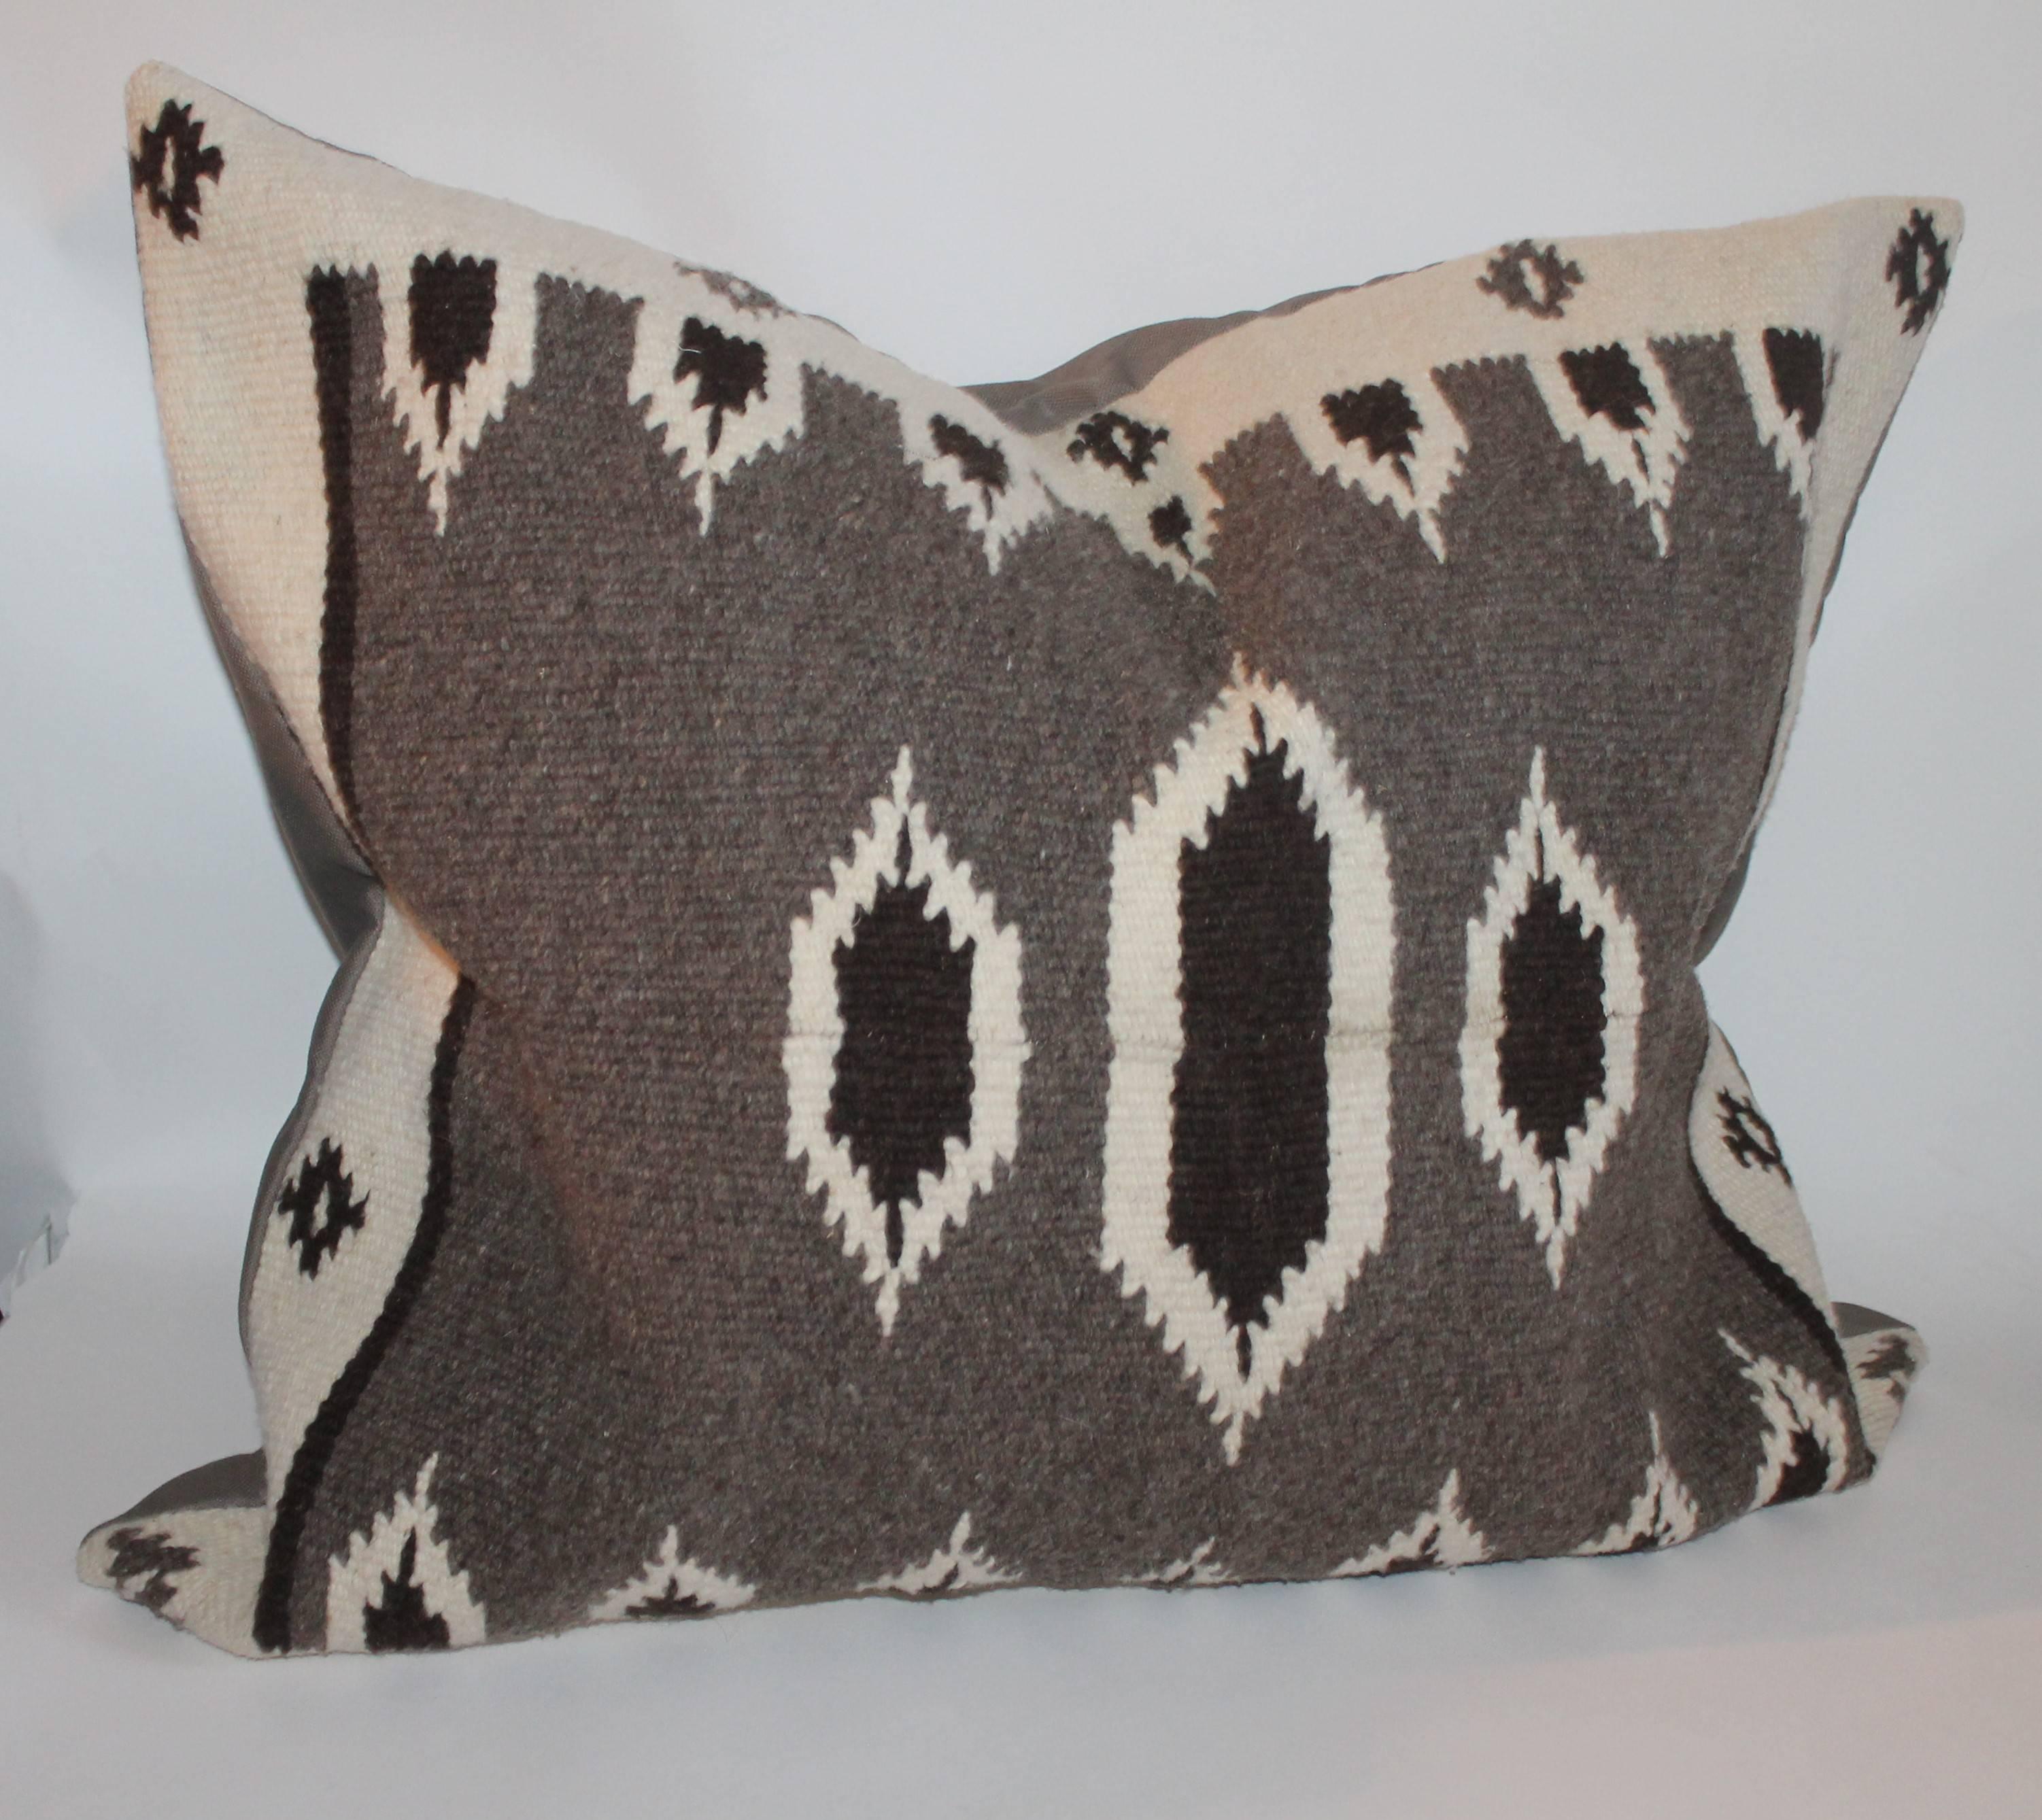 This handwoven Indian weaving pillow is in fine condition and large in size. The backing is in a dark brown linen.